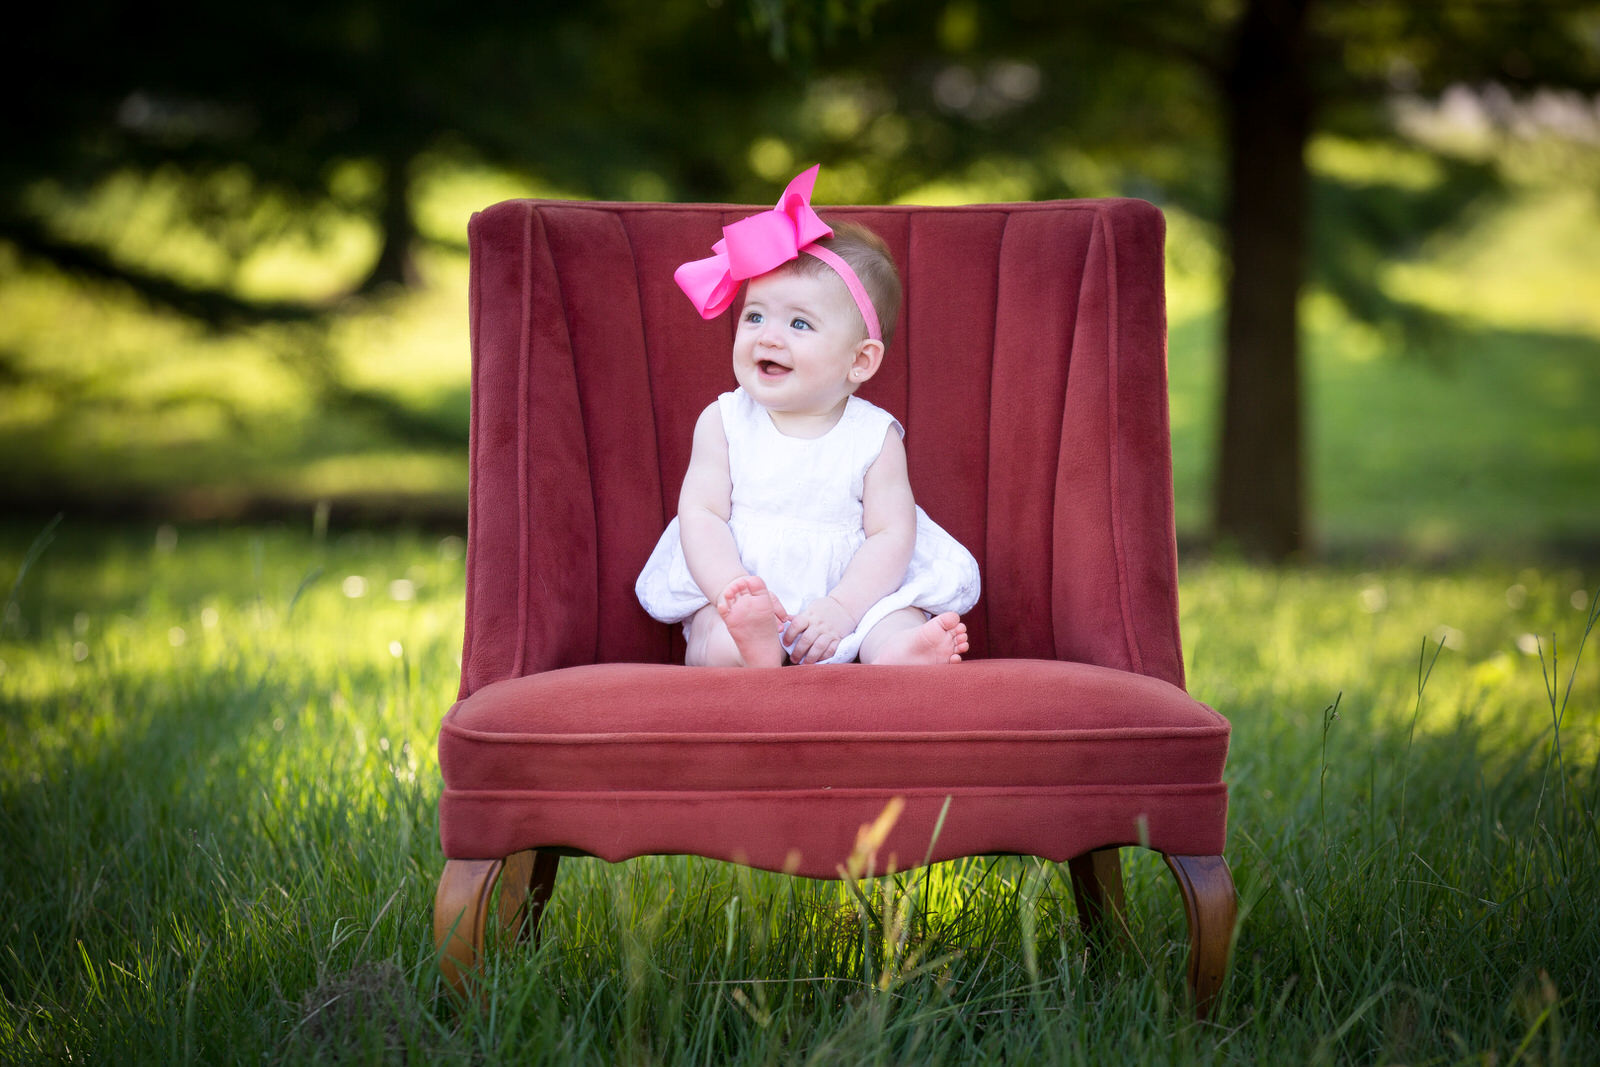 A young toddler in a white dress and large pink bow sits in a red chair in a park fort worth babysitters